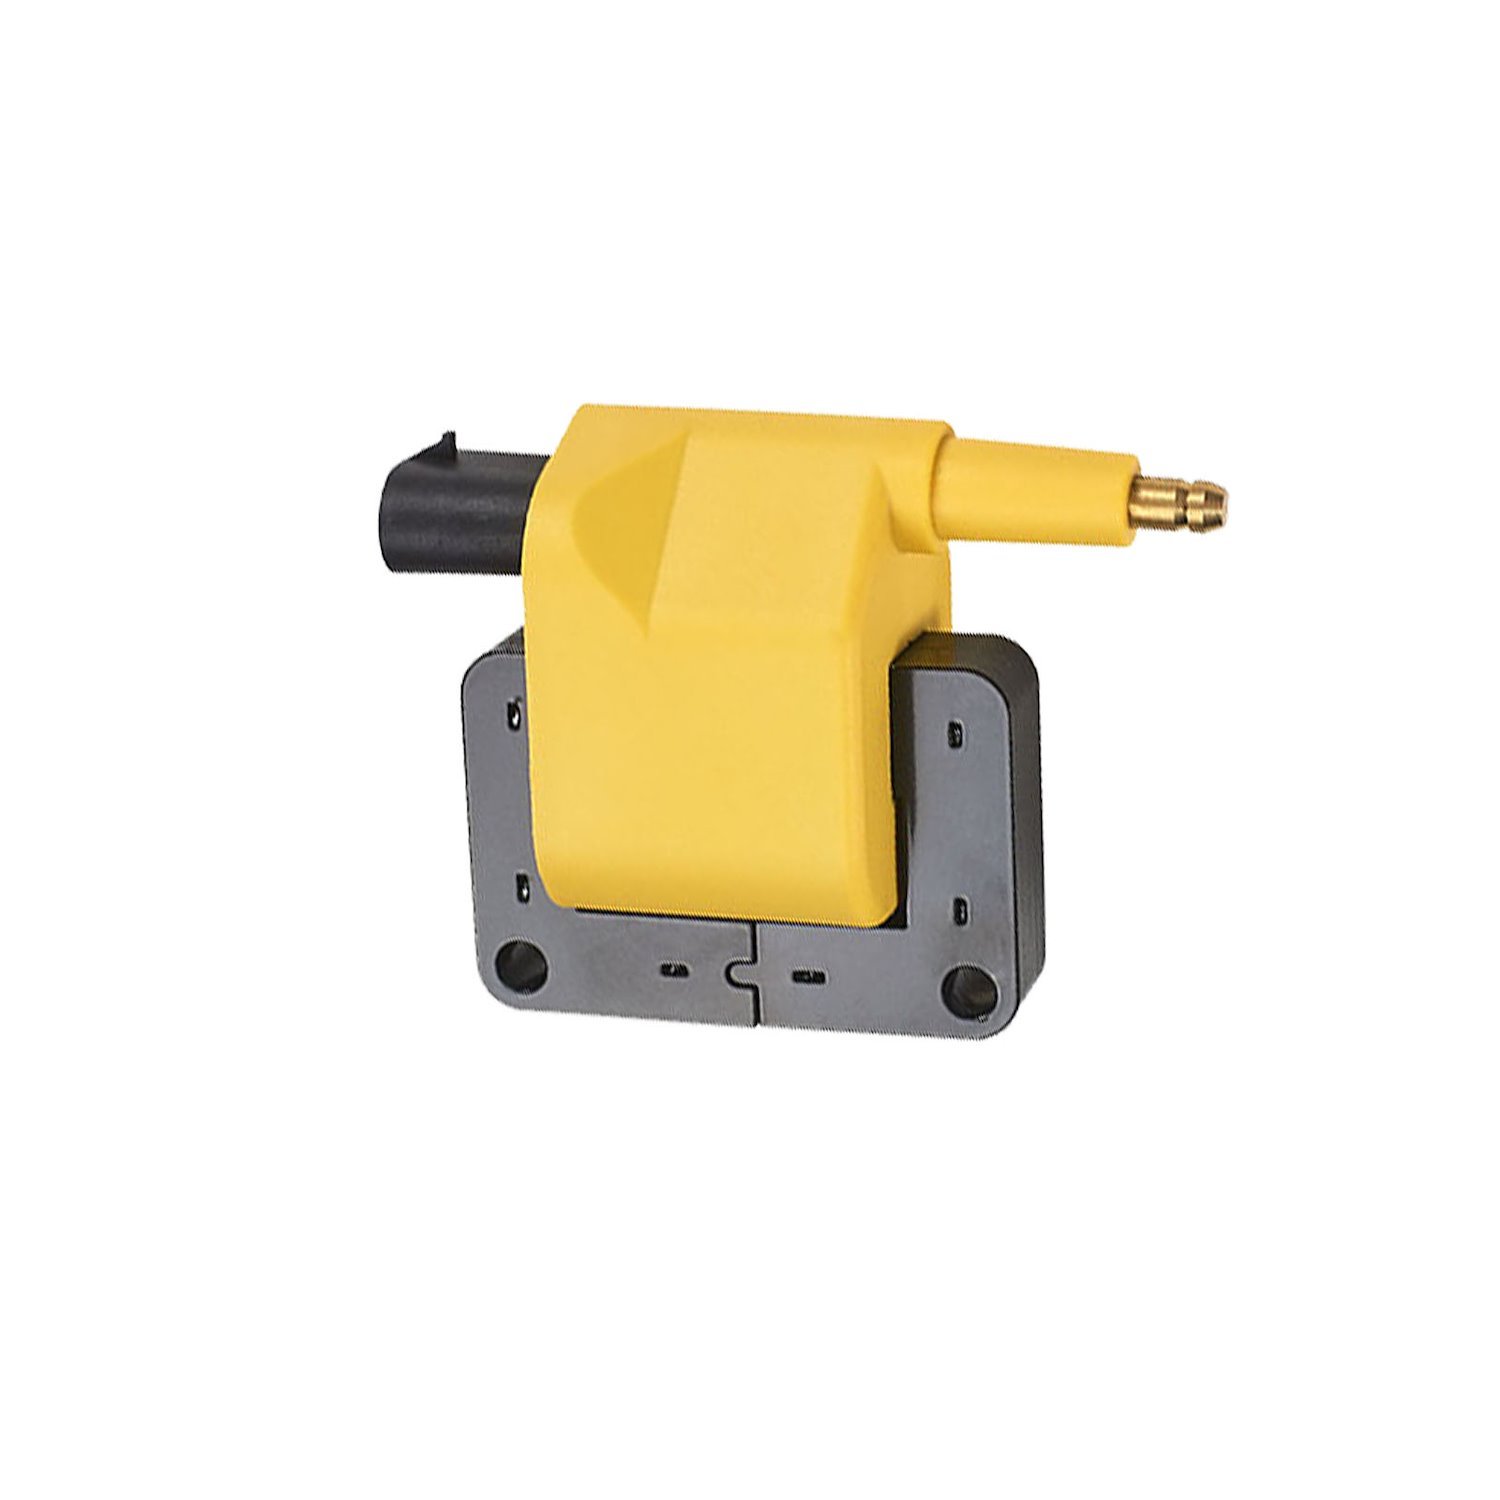 High-Performance Ignition Coil for Chrysler Dodge Jeep Plymouth 5.2L 3.9L 5.9L [Yellow]